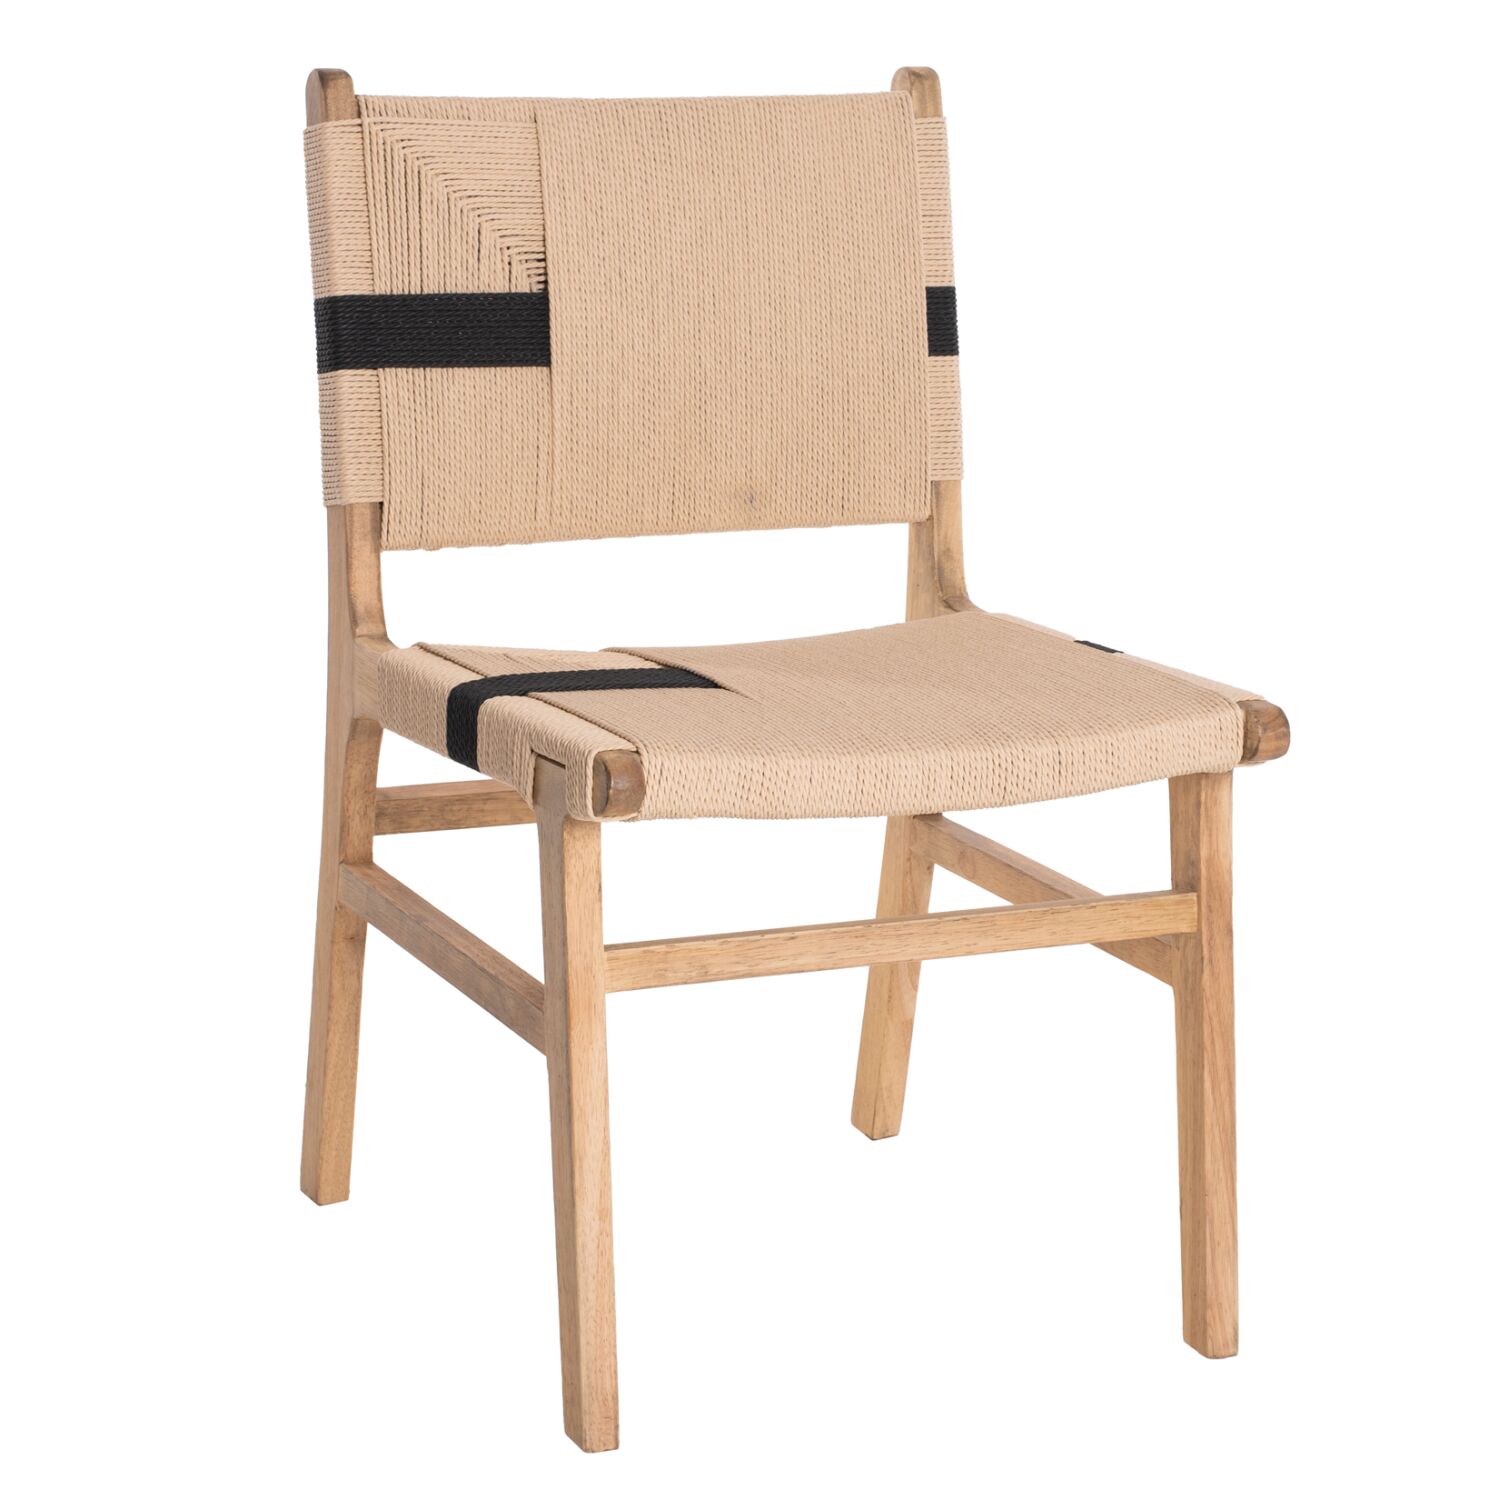 LEISURE CHAIR RUBBERWOOD AND ROPE IN NATURAL RUSTIC COLOR 50x60x88Hcm.HM9323.01